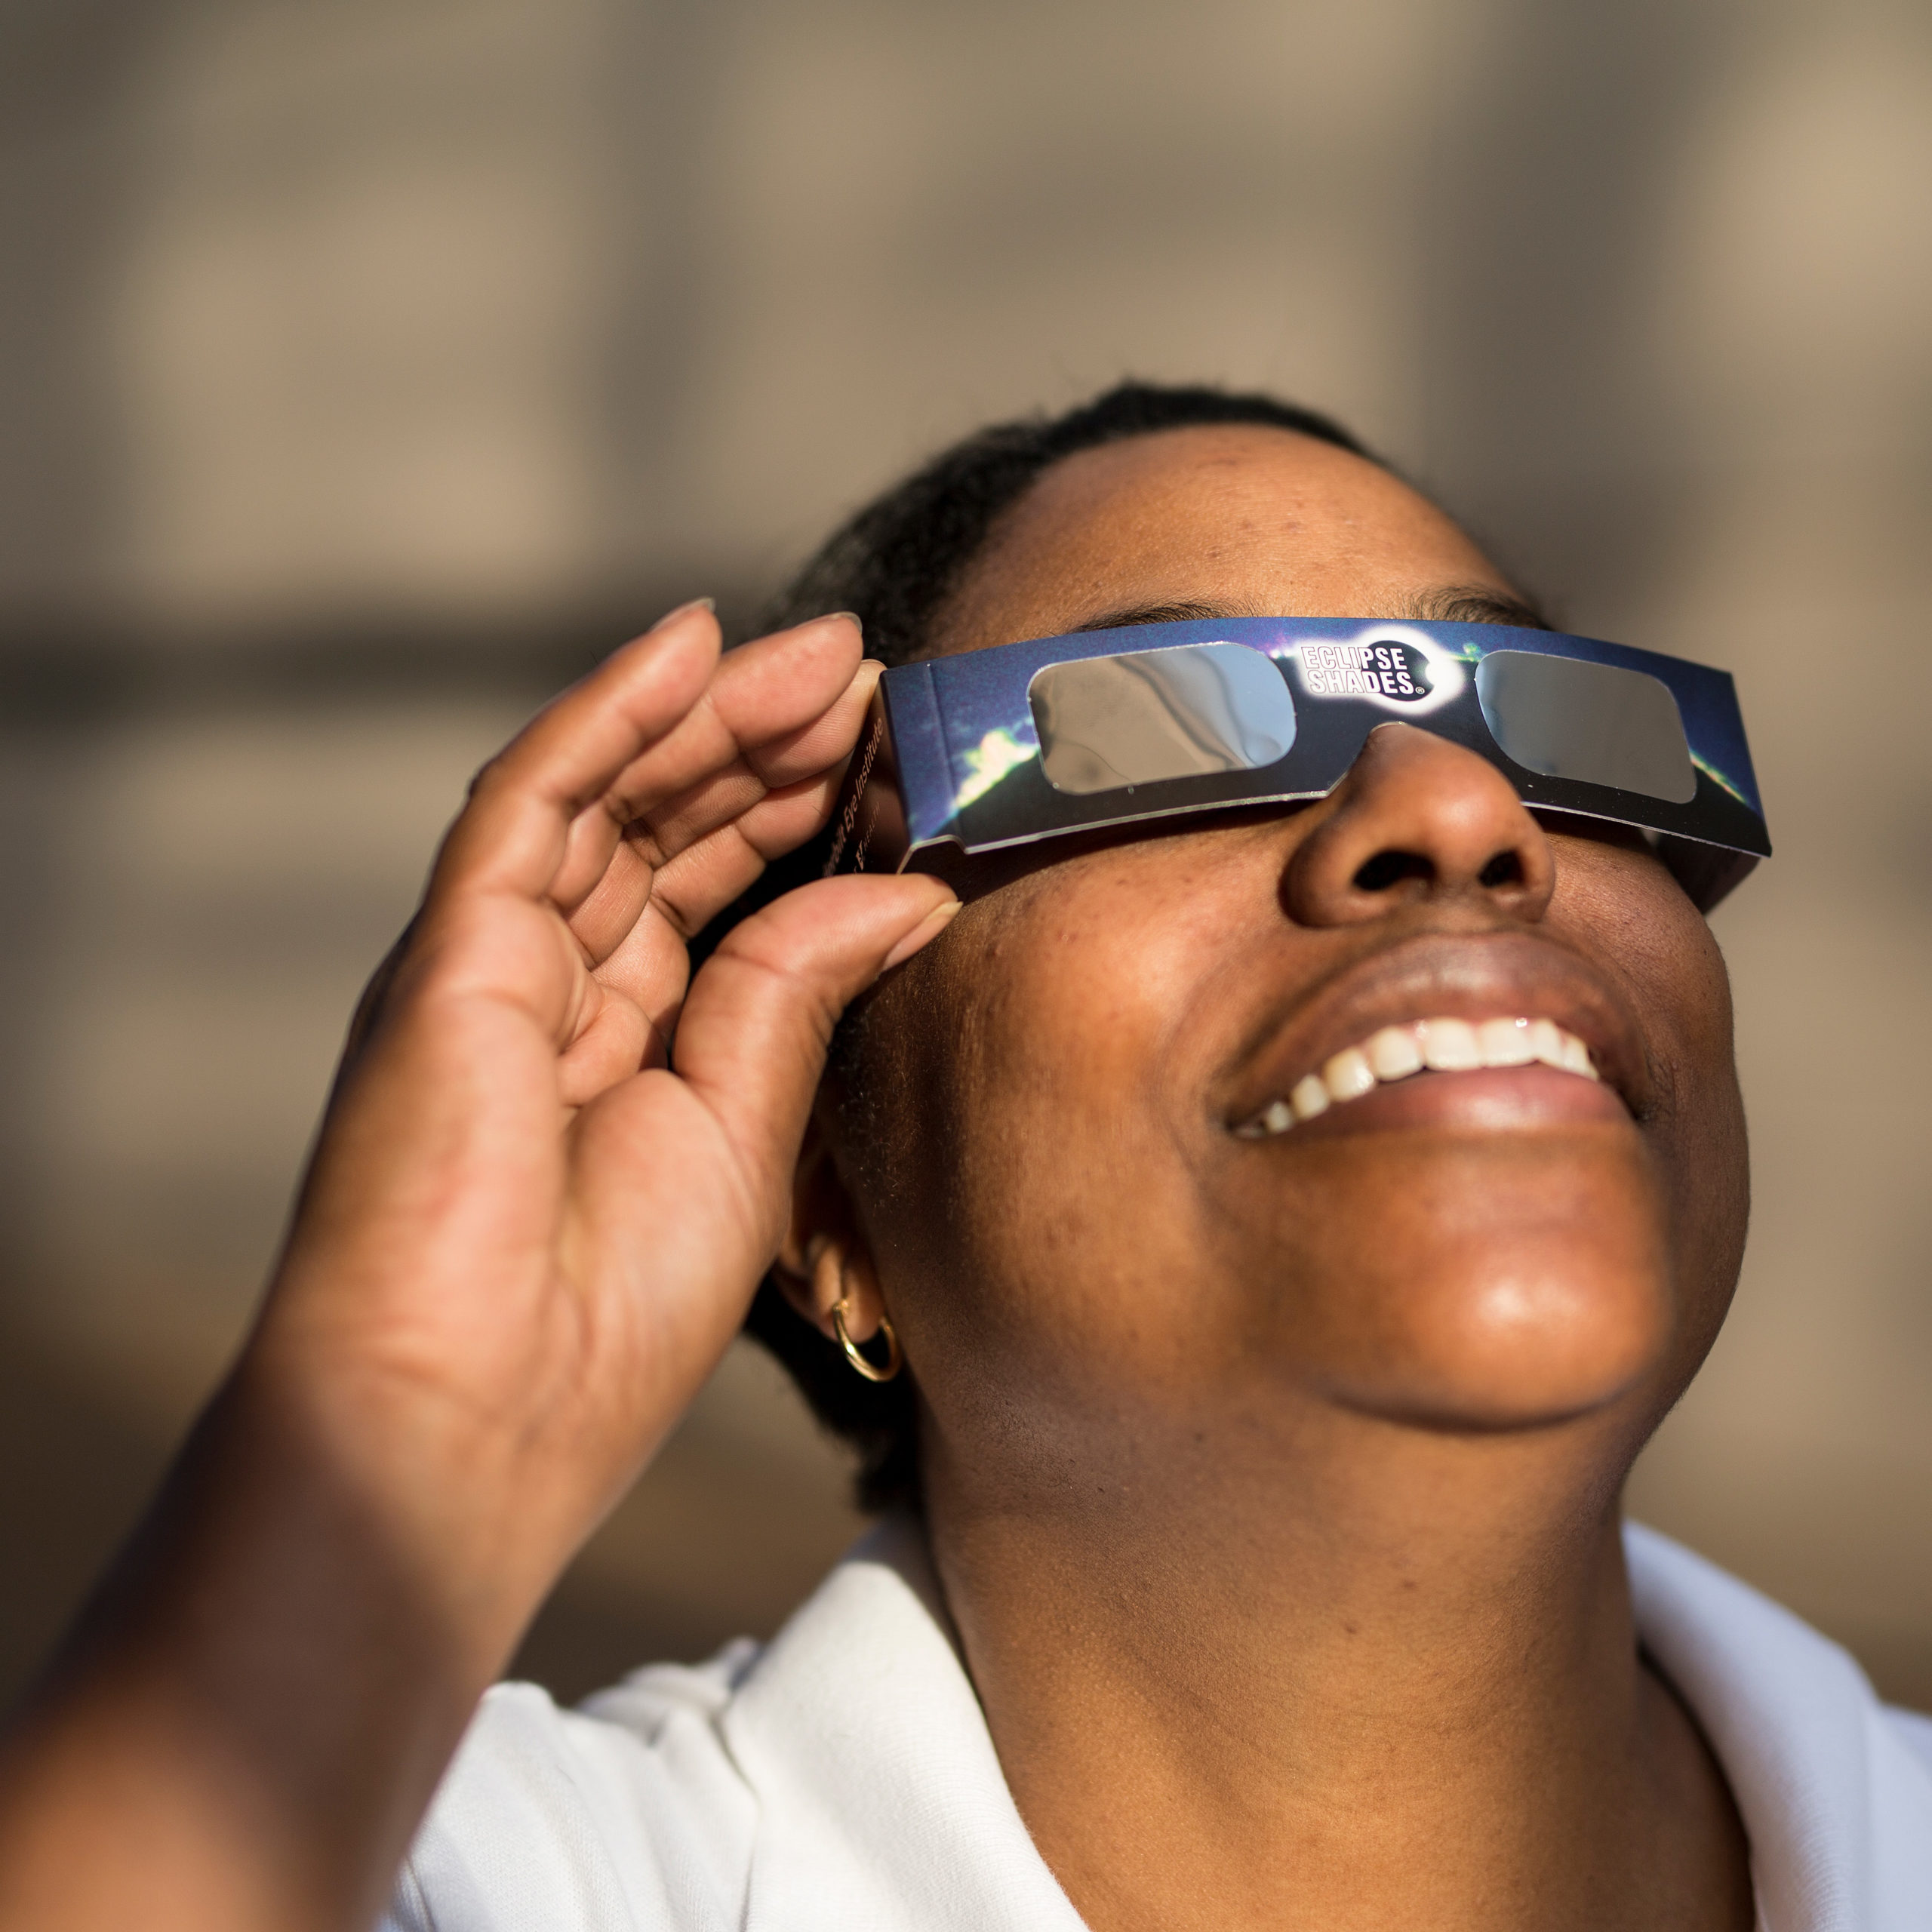 Keep an eye on safety during a solar eclipse